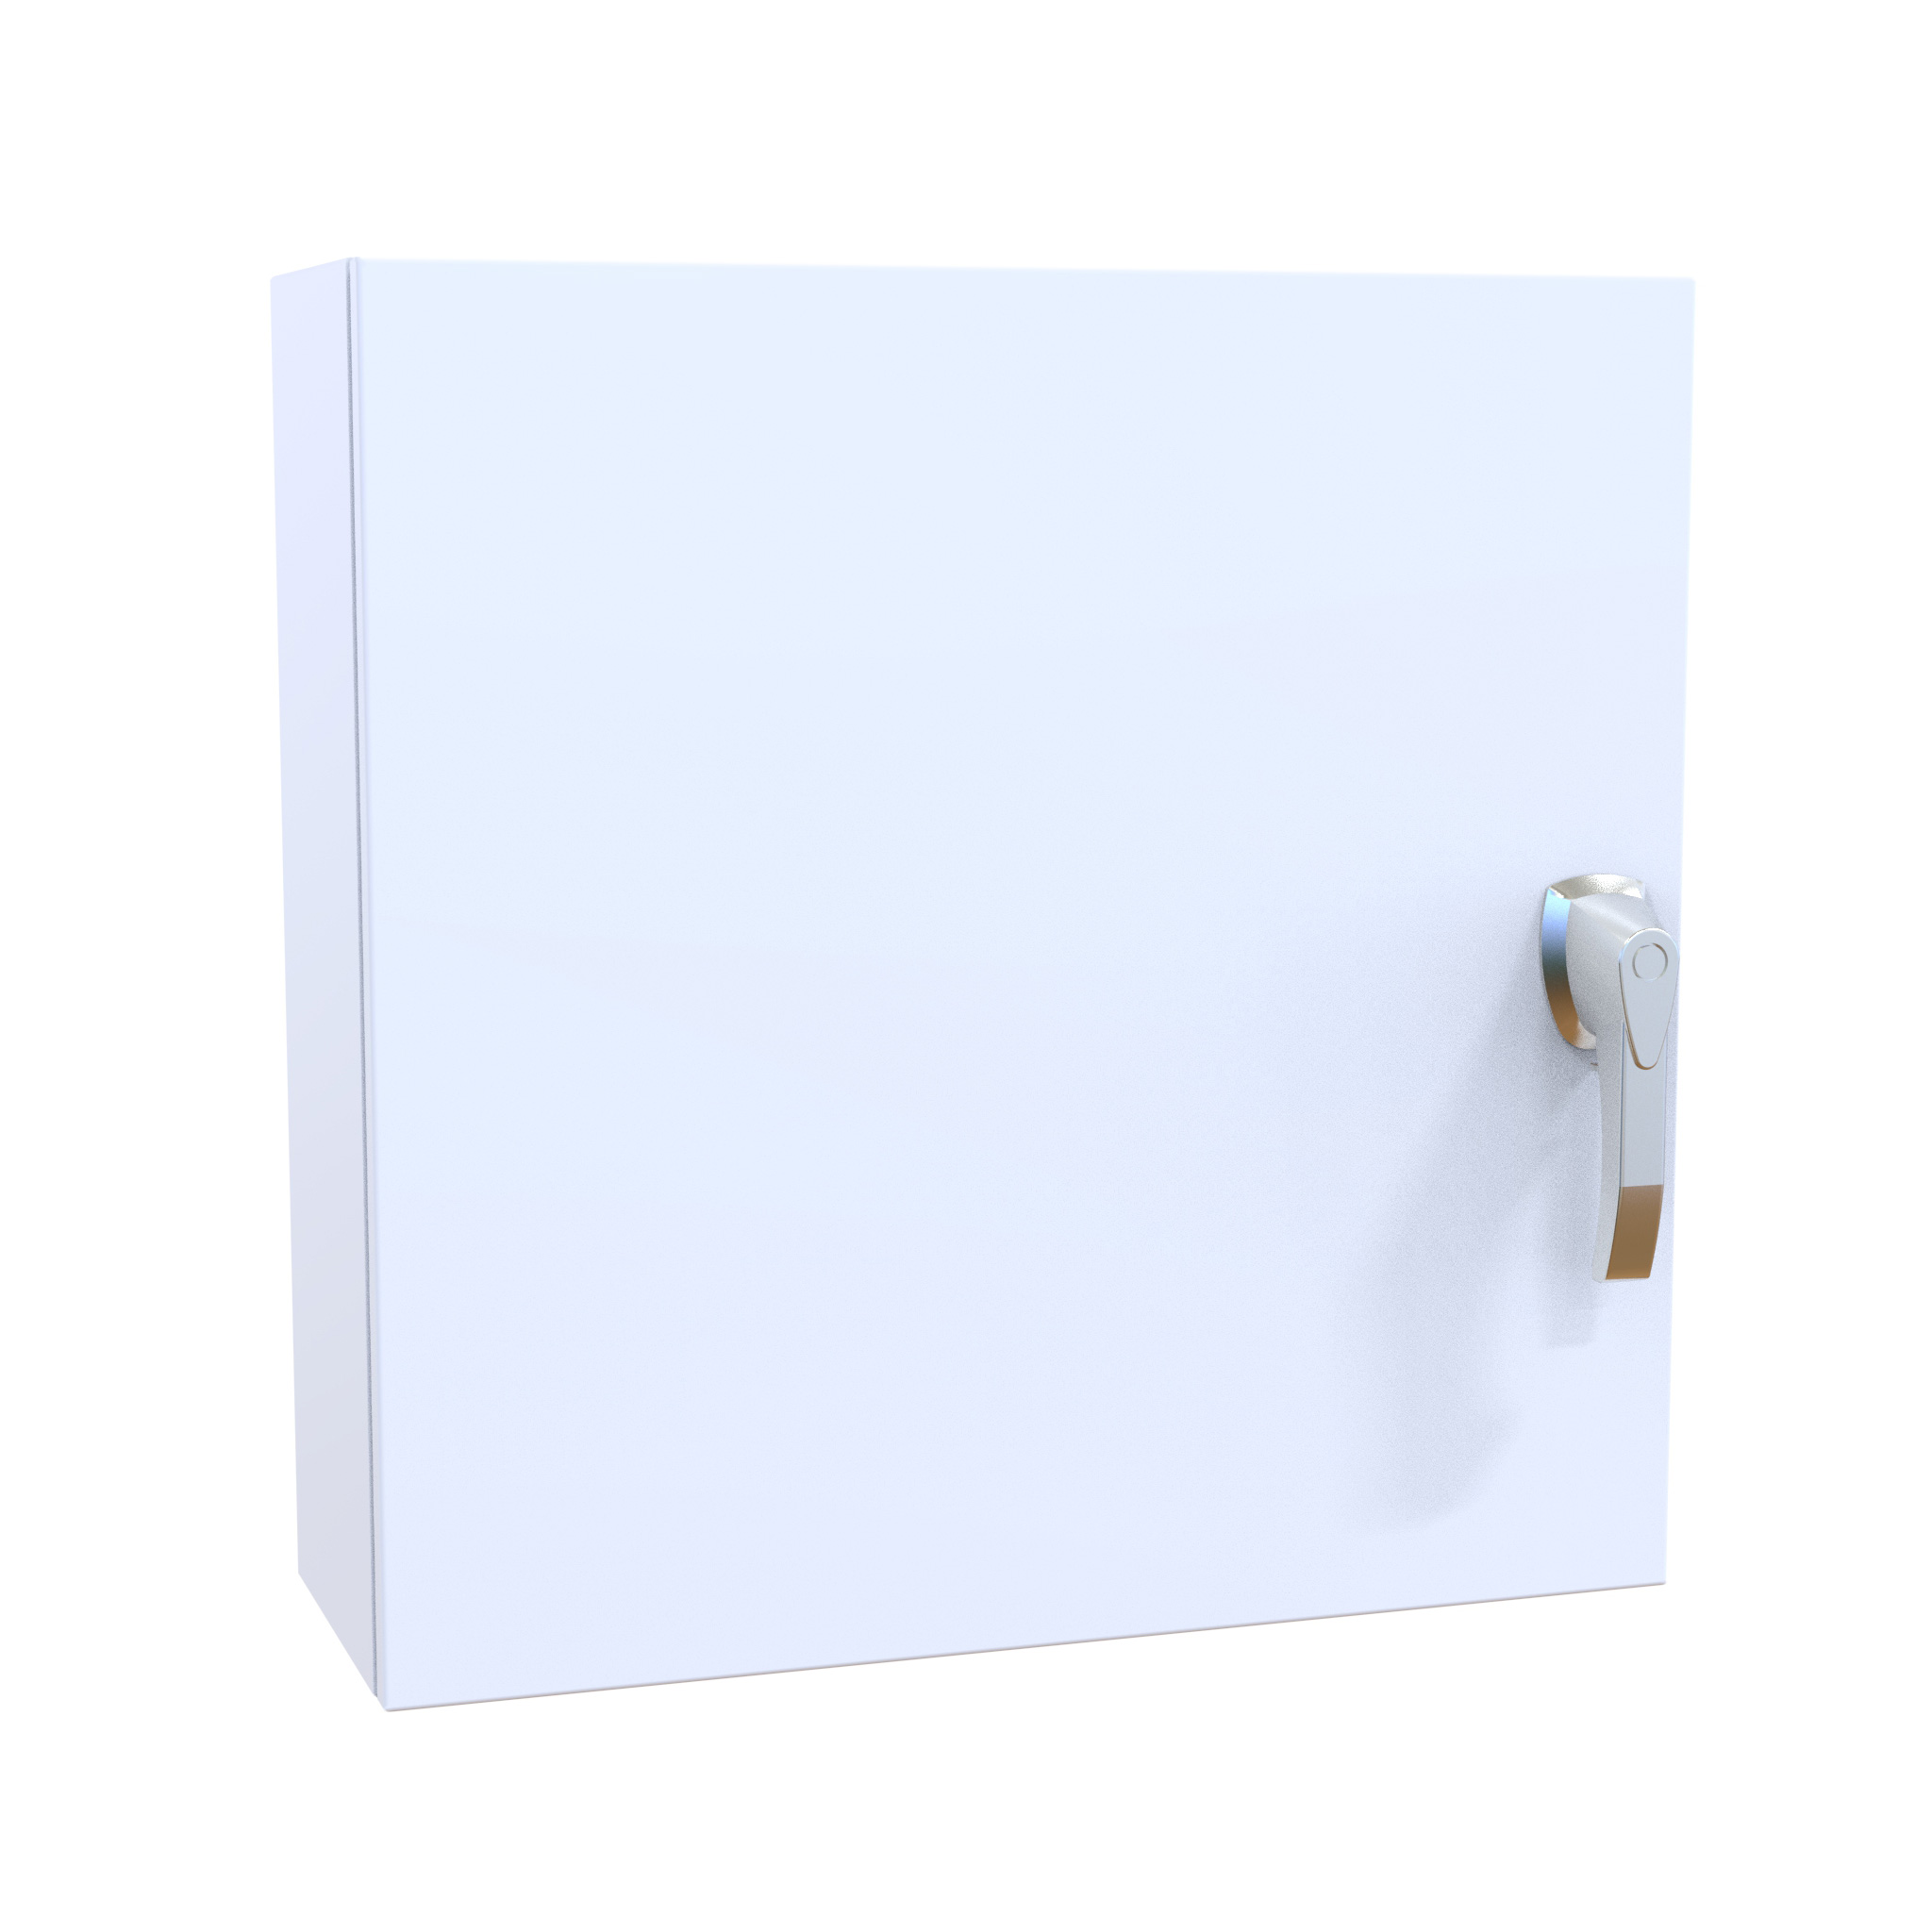 Hammond Manufacturing - Type 4X Painted White Stainless Steel Wallmount Enclosure